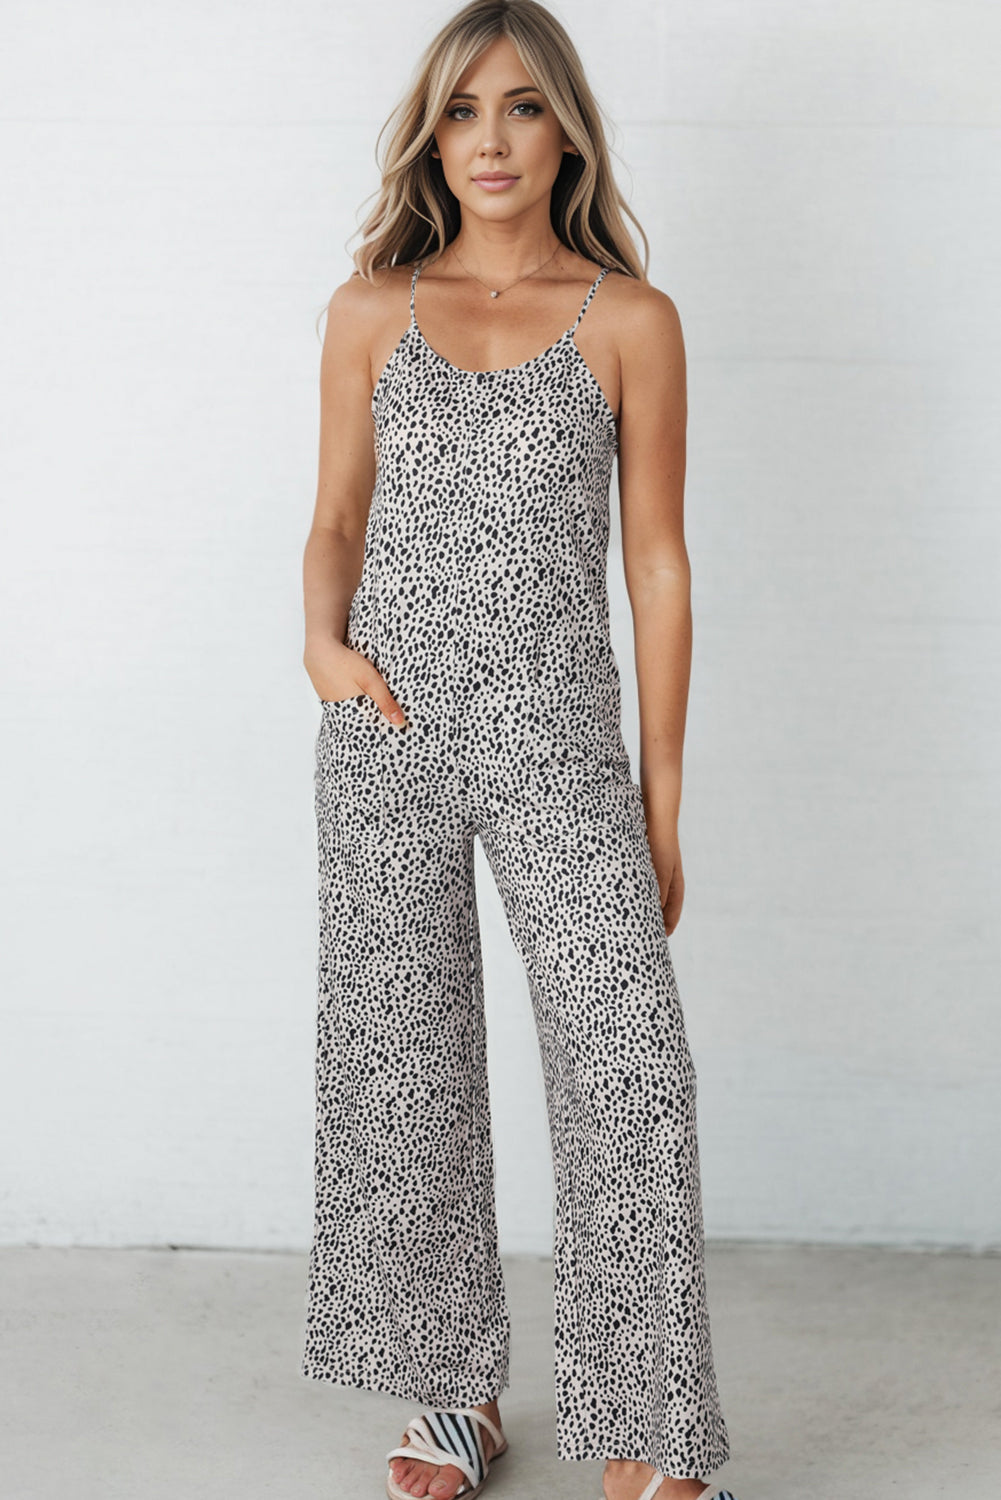 Trendsi Beige / S Printed Spaghetti Strap Jumpsuit with Pockets